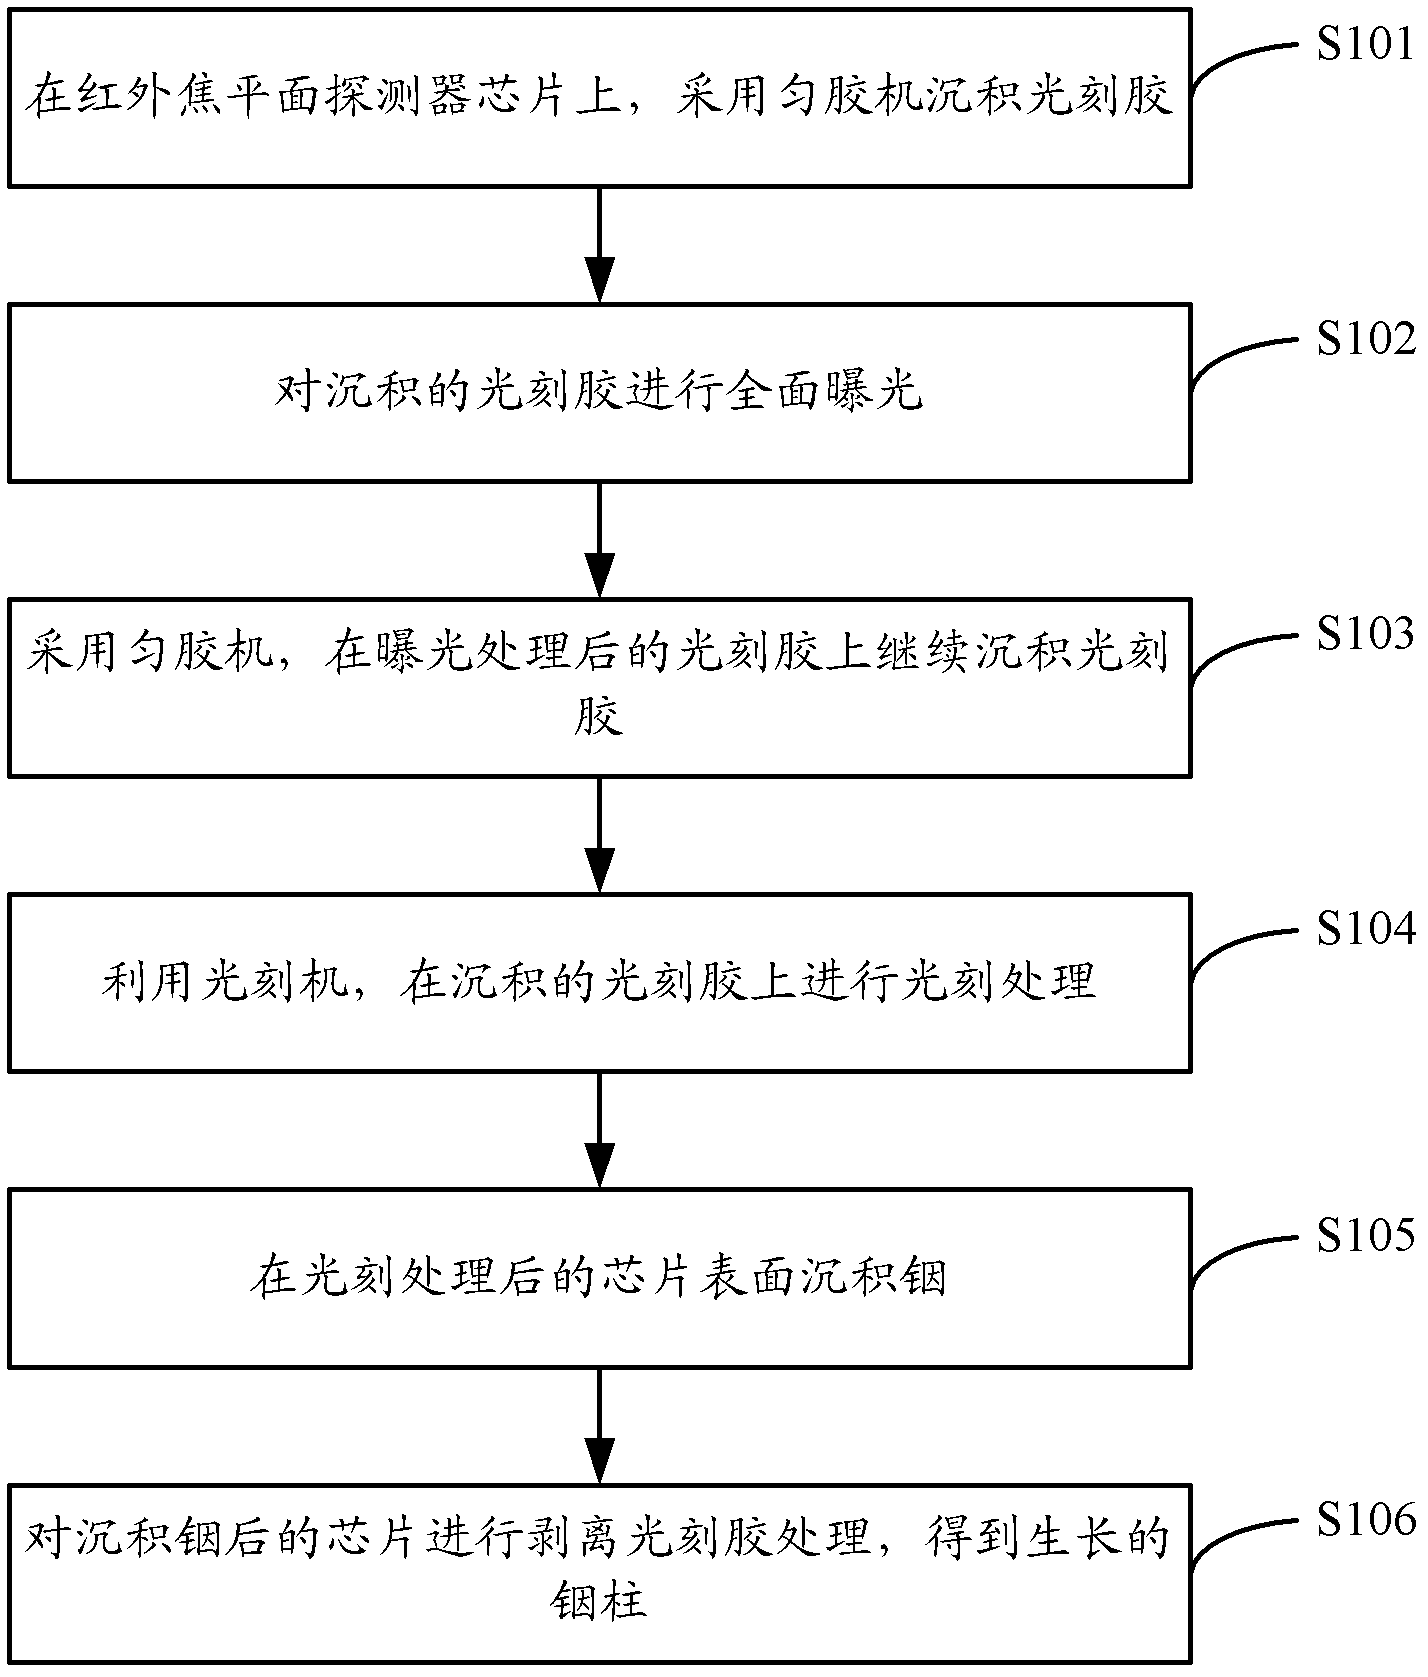 Large-scale indium column generation method for infrared focal plane detector